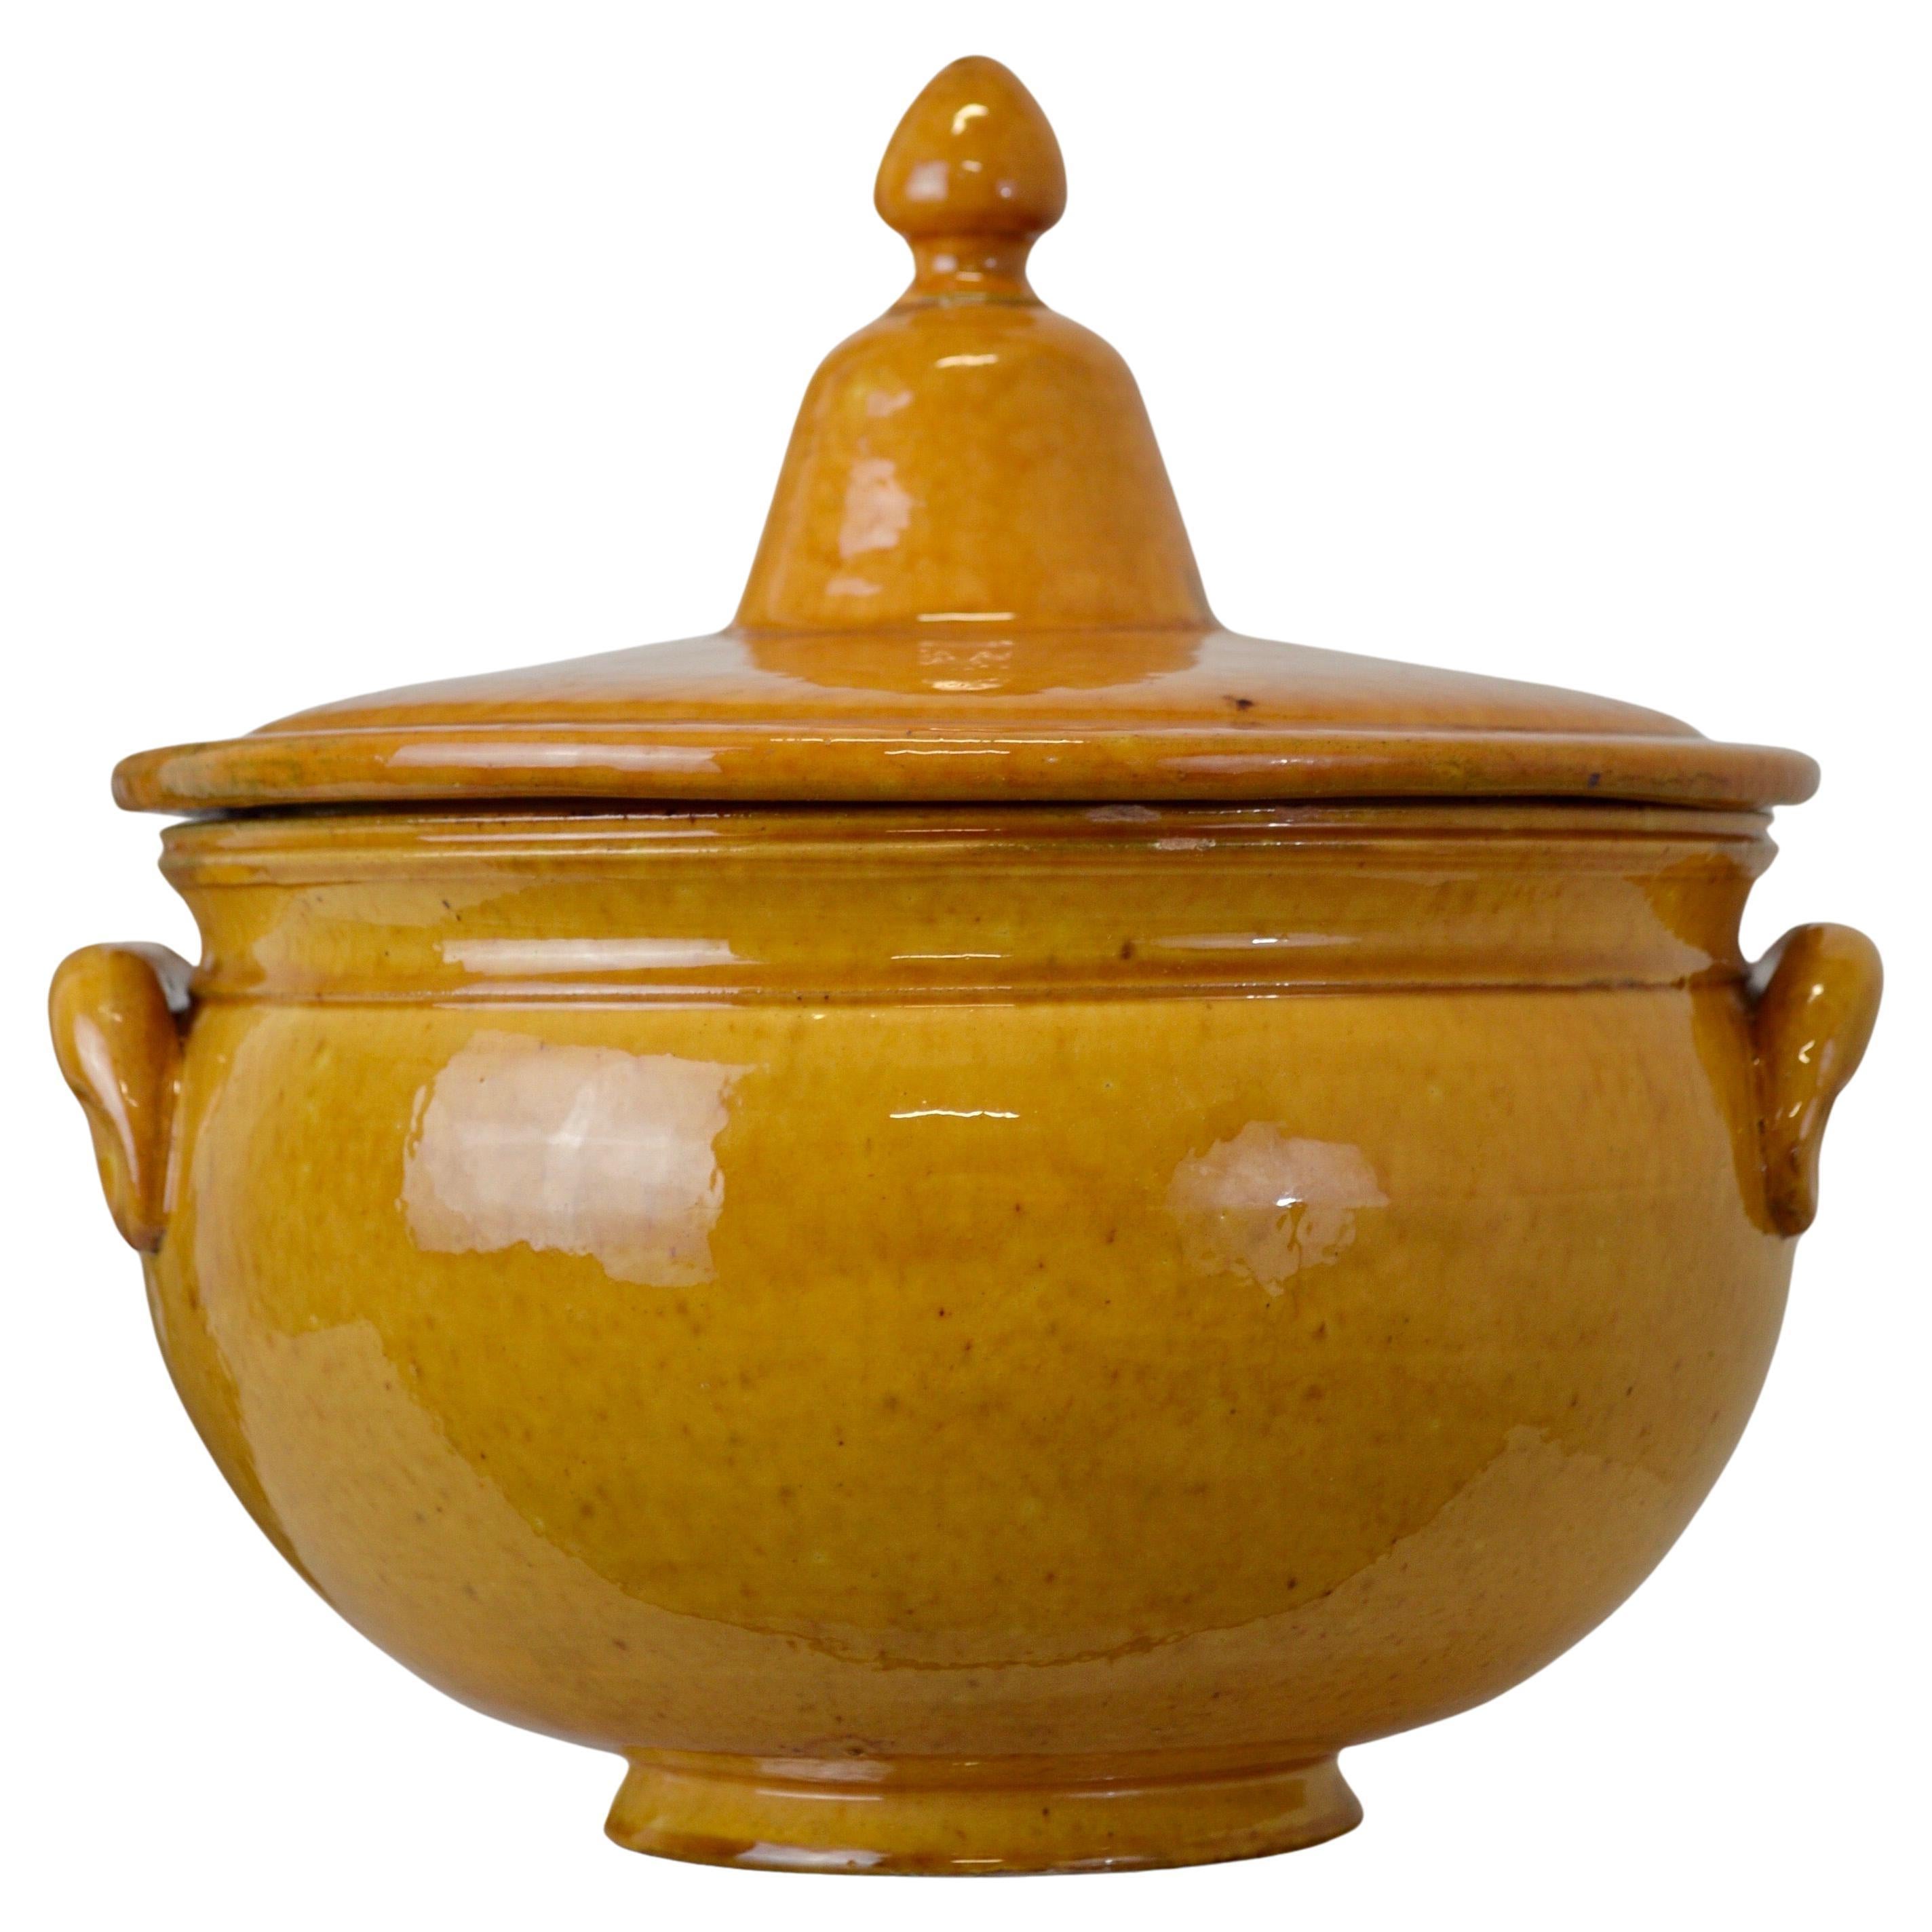 A glossy yellow soup tureen from the French company Biot France 1950